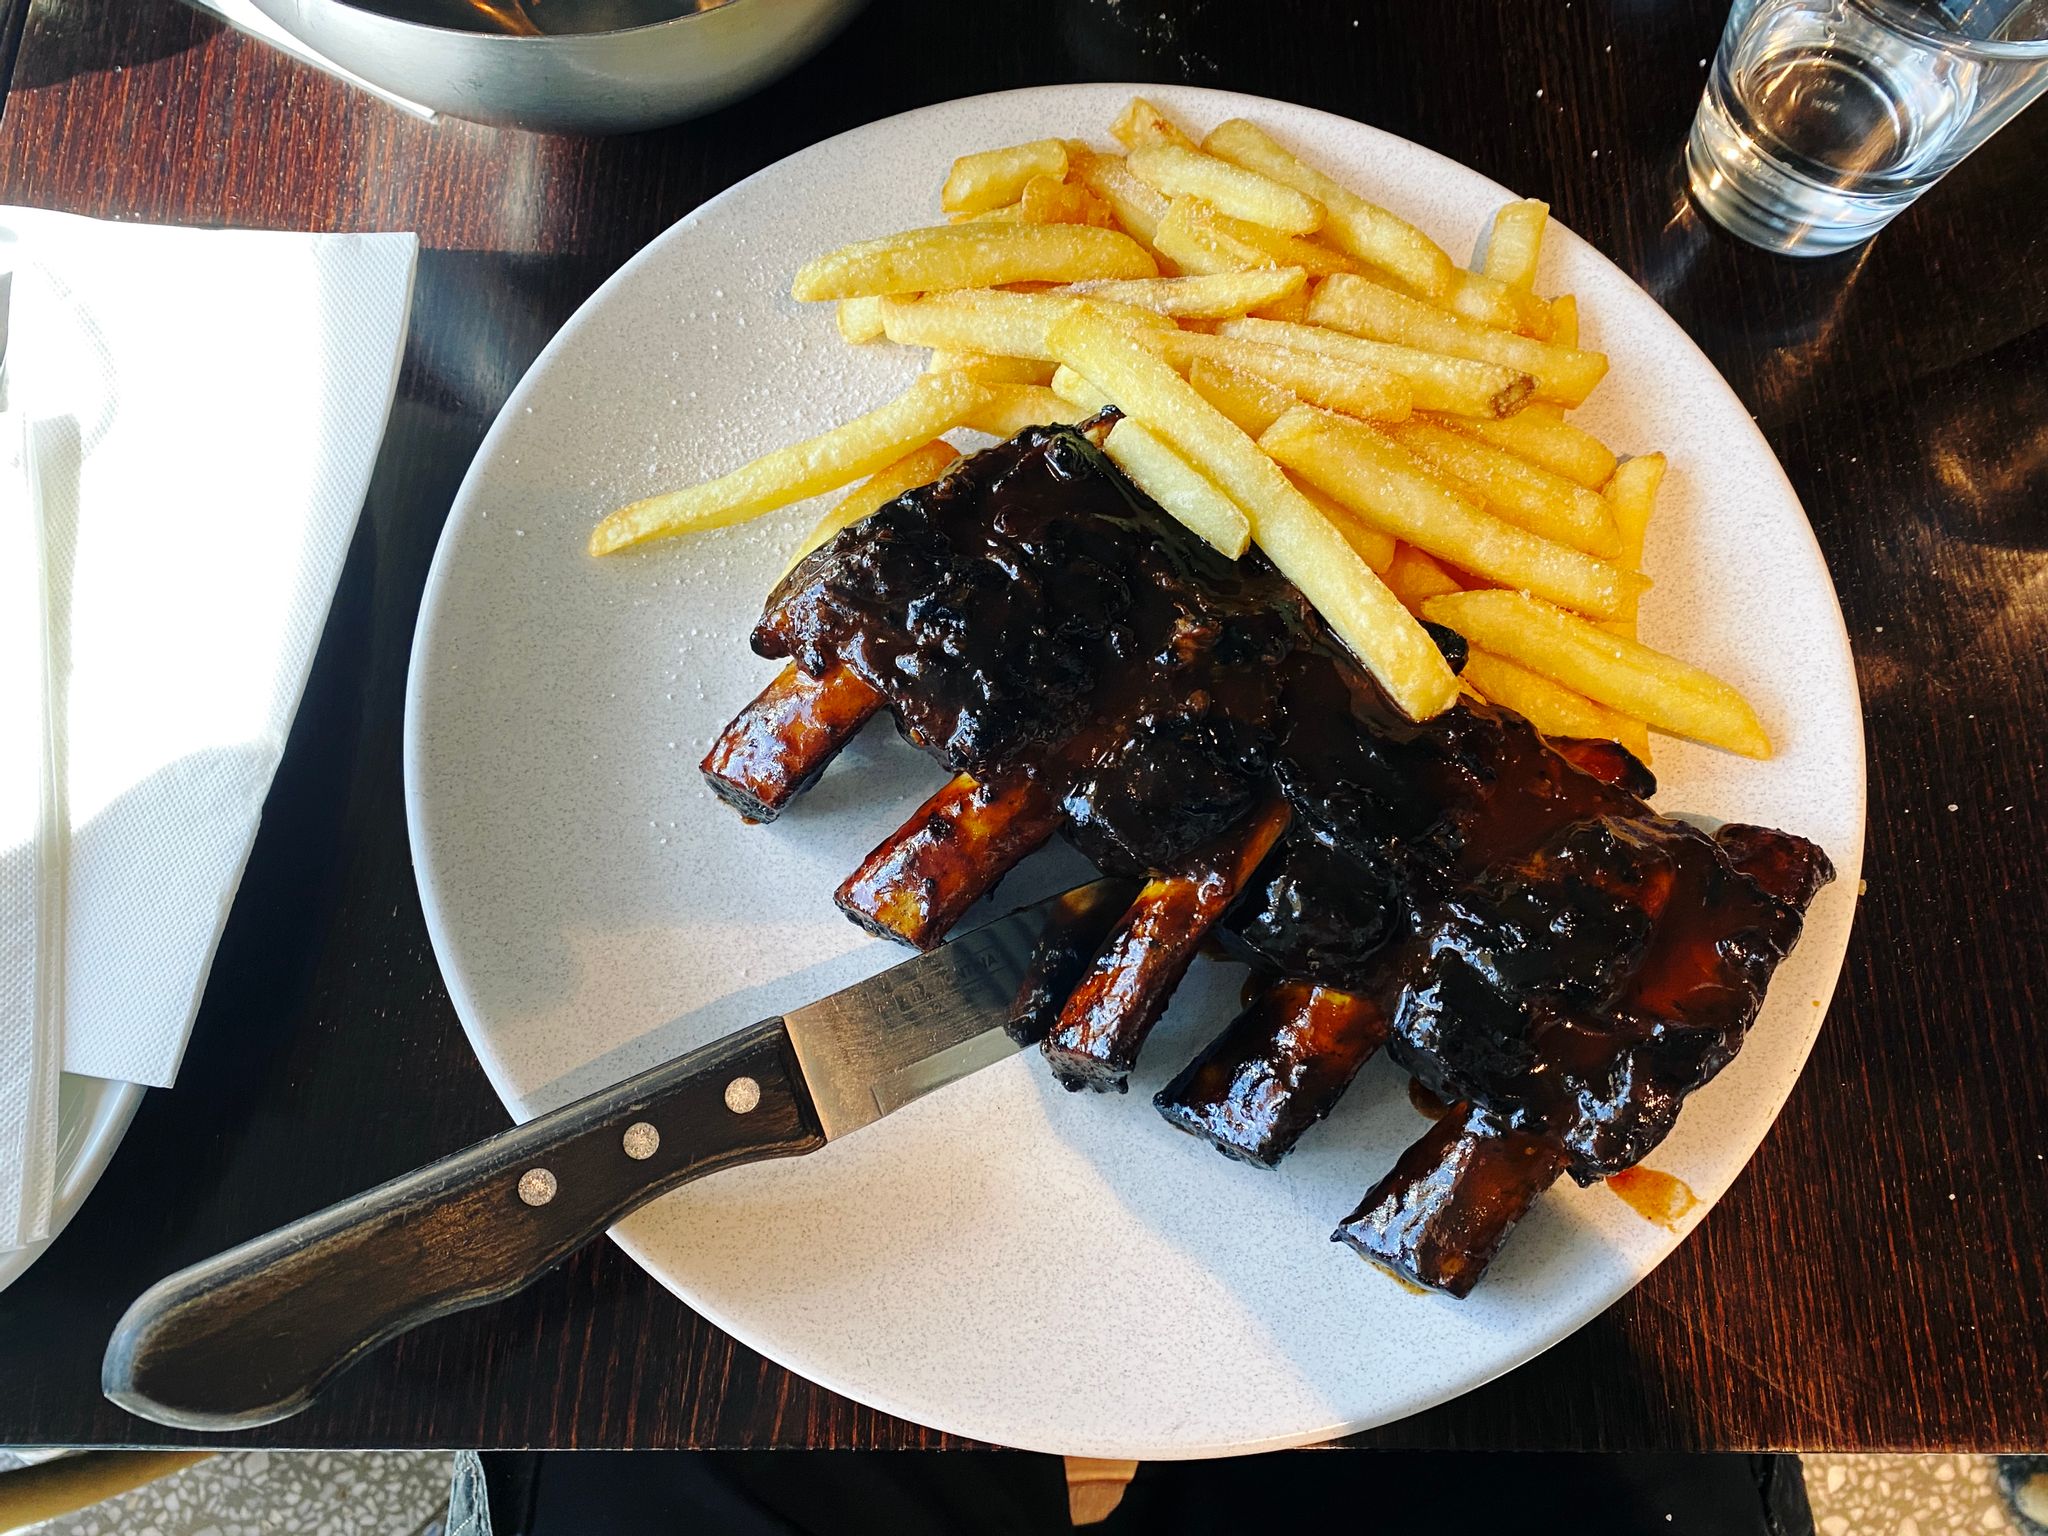 A photo of a plate with chips and a half rack of beef ribs in it.